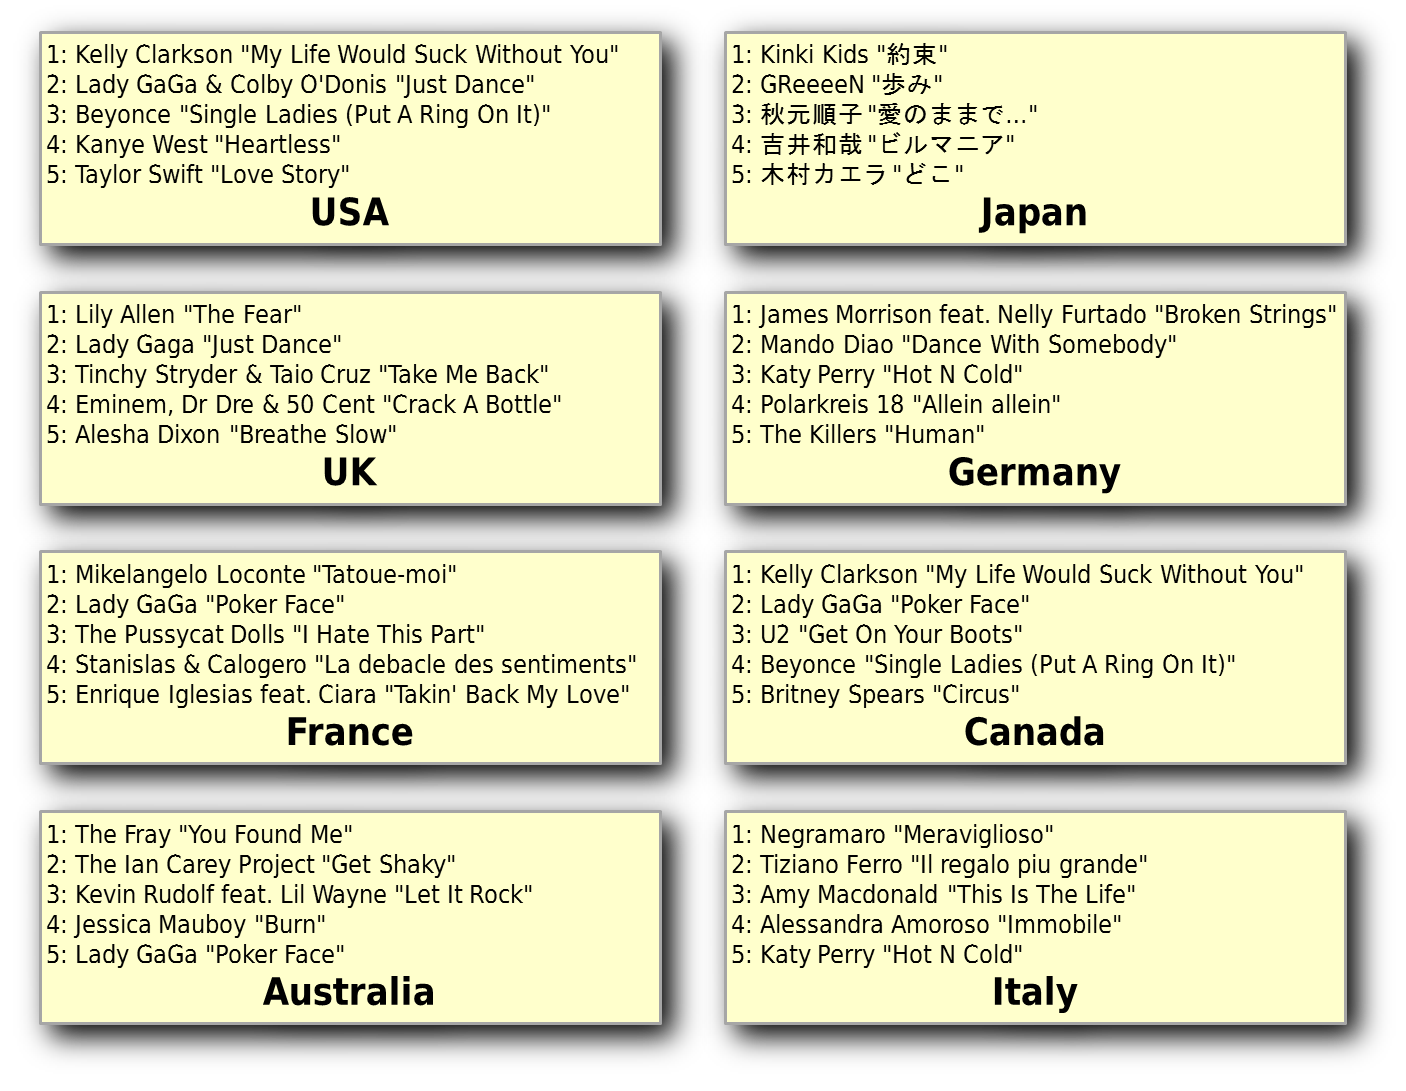 List of top 5 songs in 8 countries